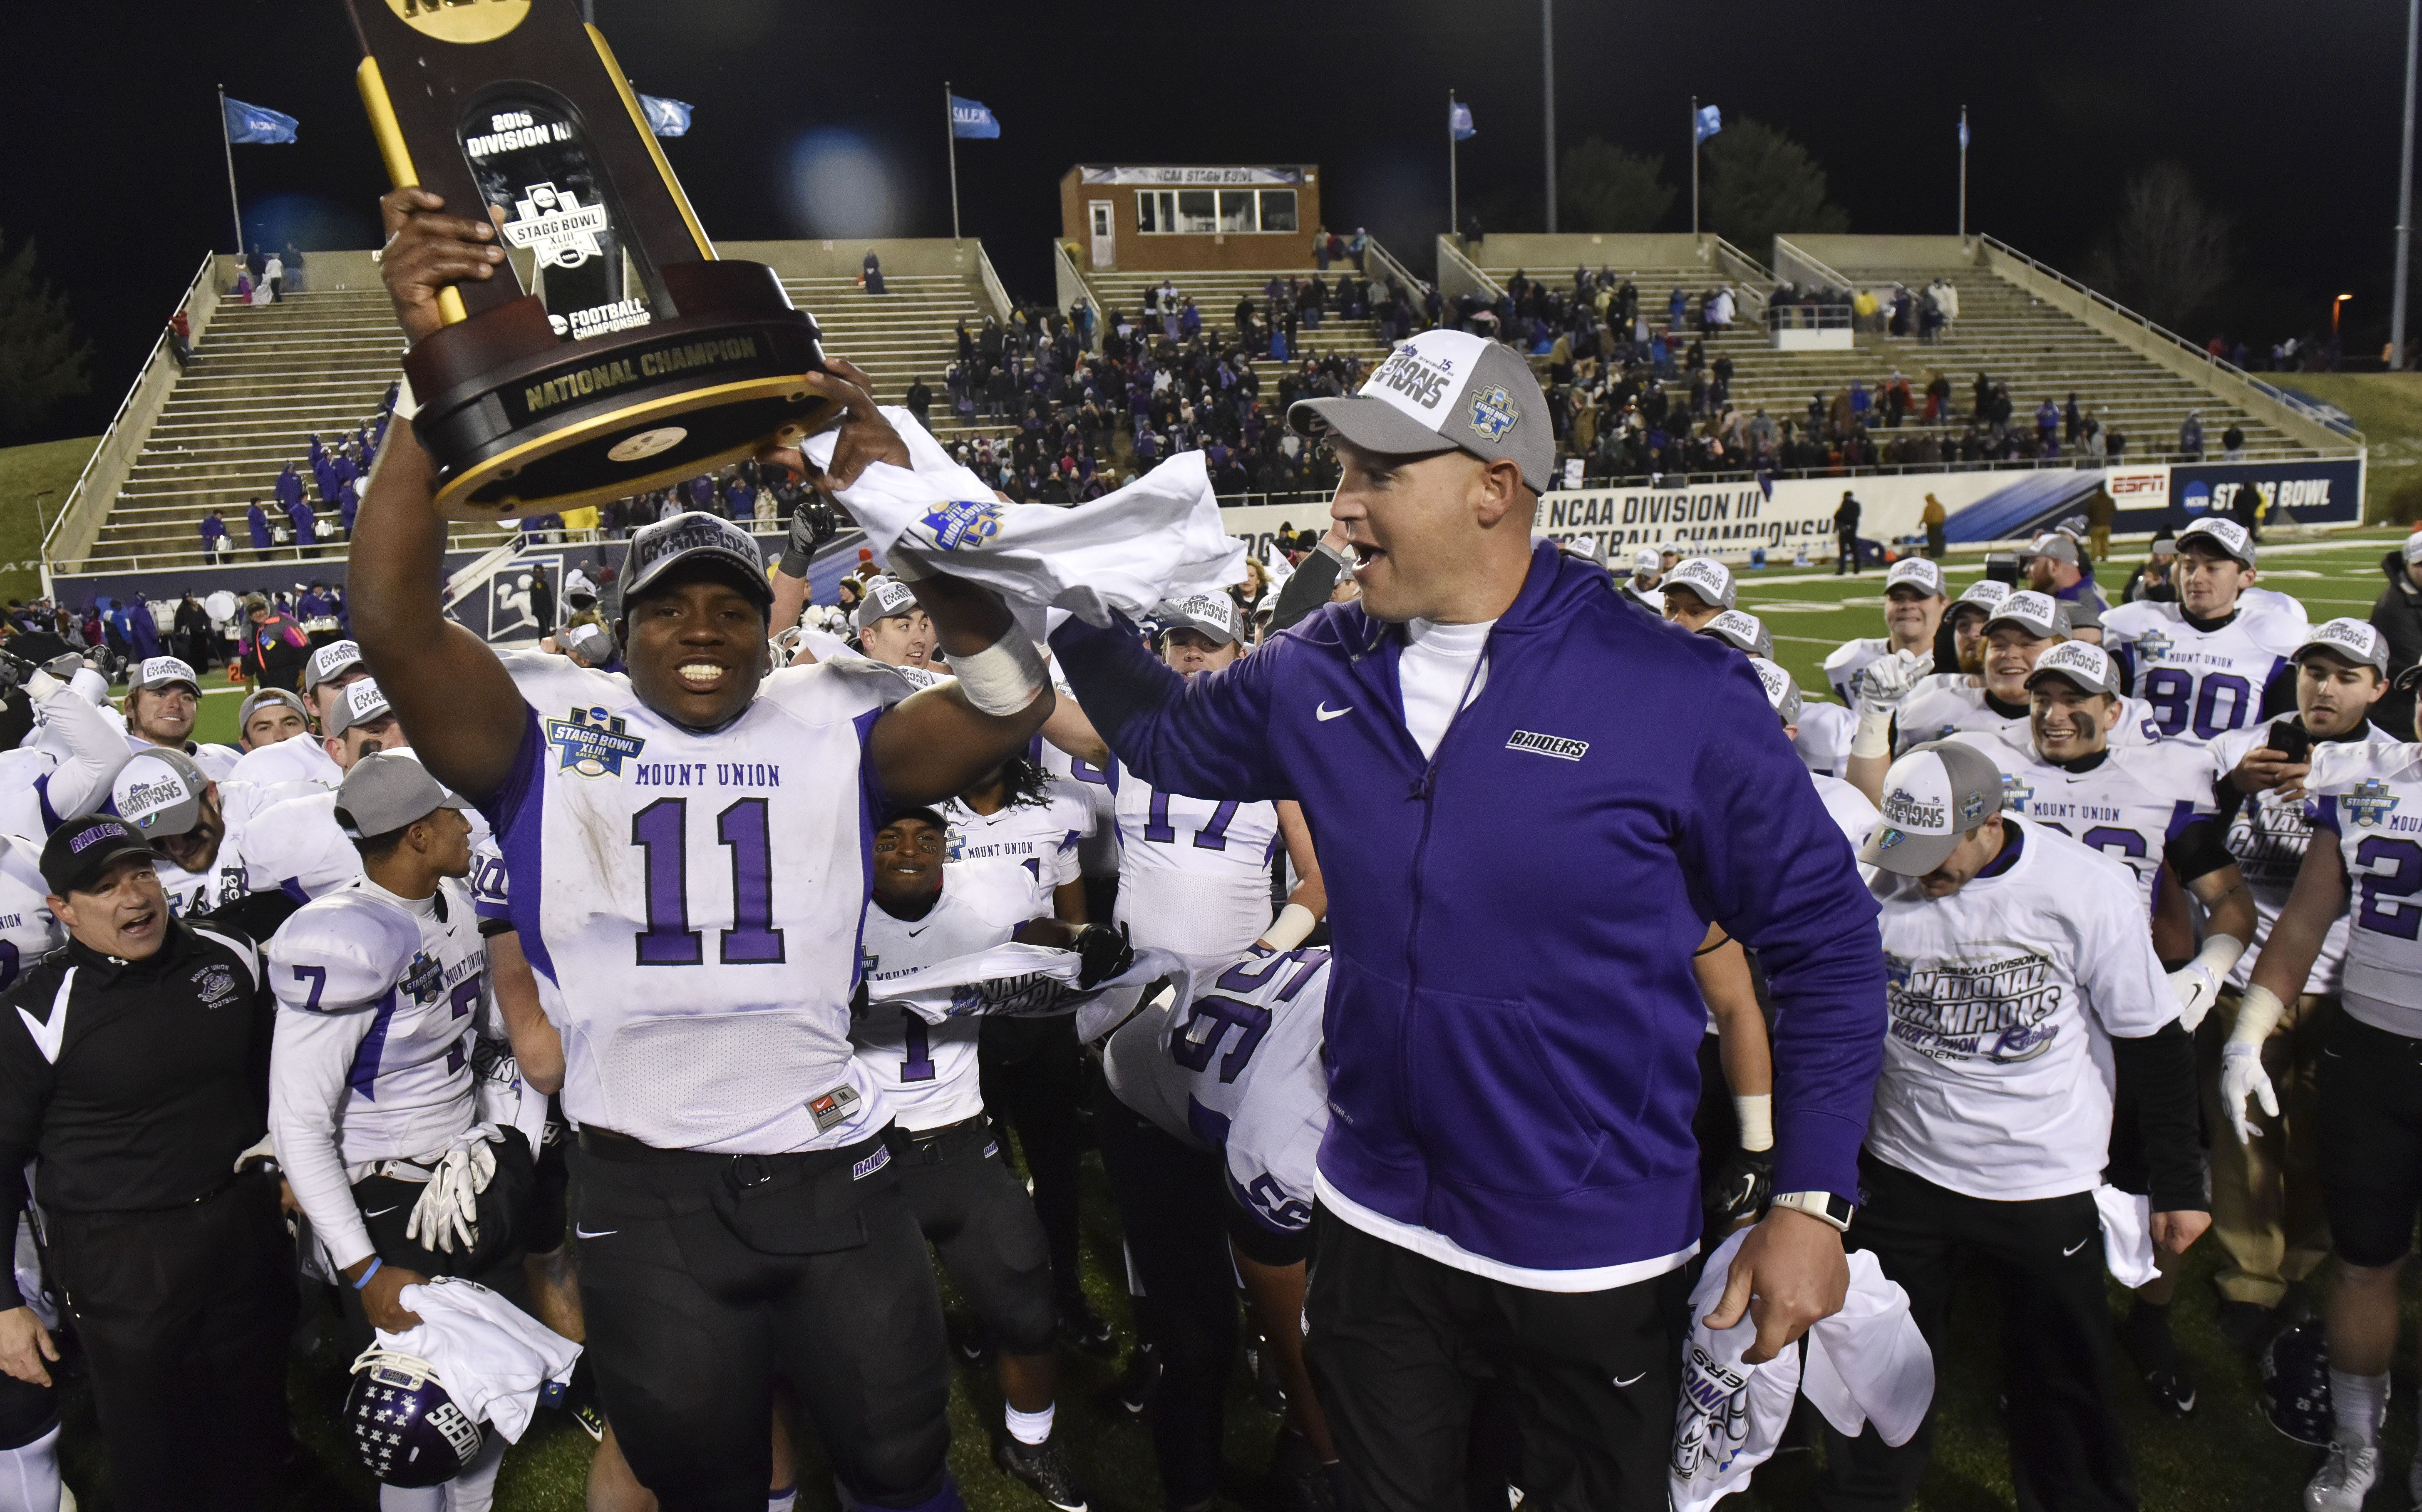 Mount Union Football Schedule 2022 Across Ohio, College Football For The Fall Is Being Canceled - Cleveland.com